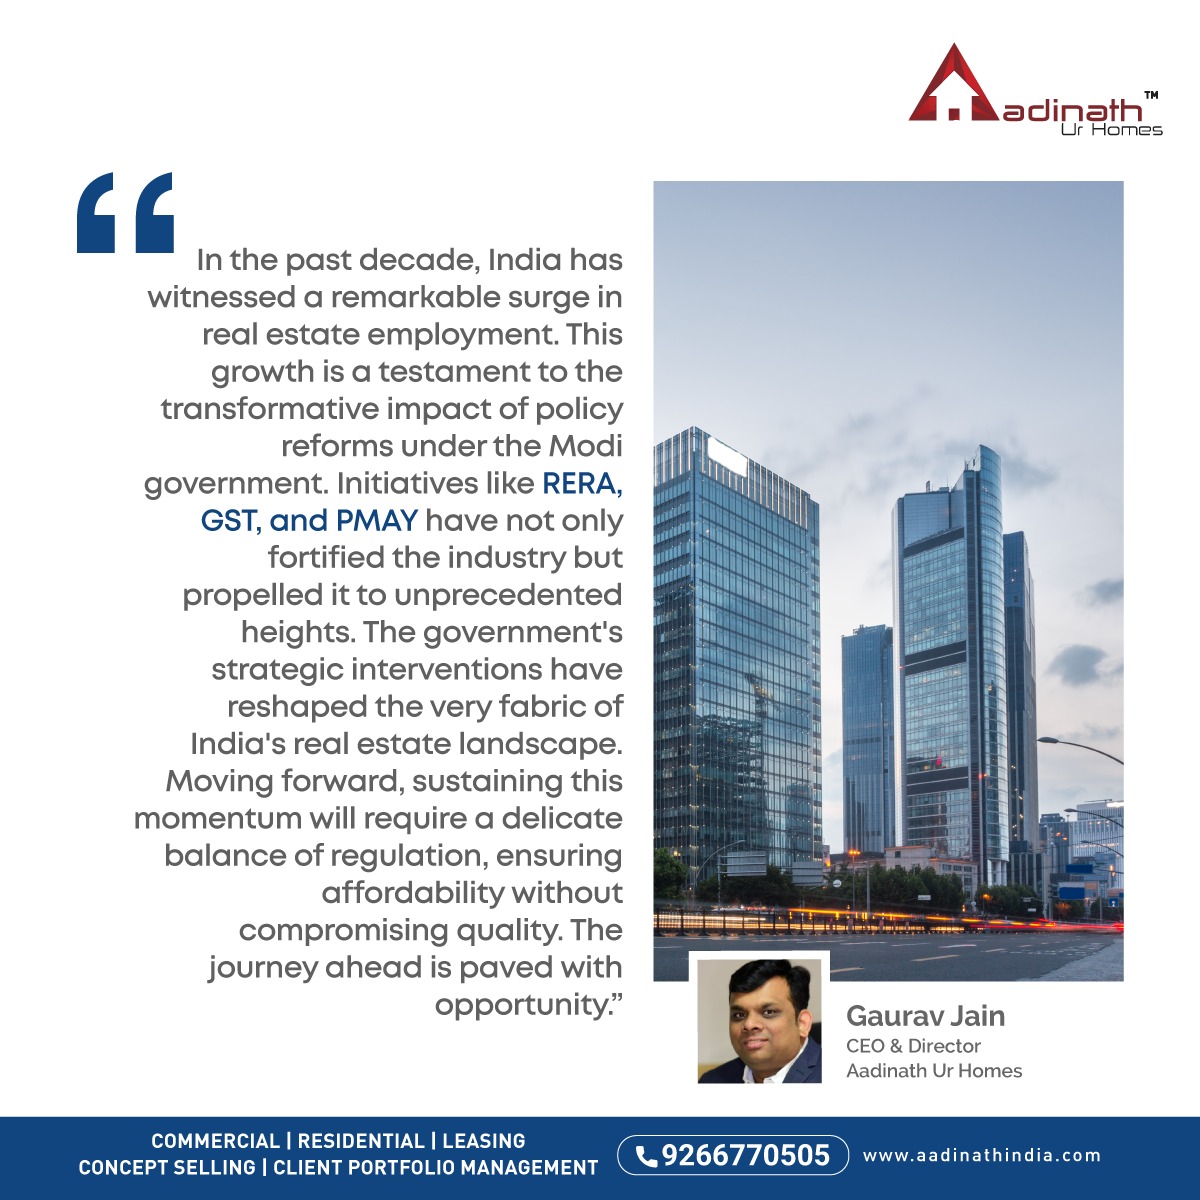 As per recent data, India’s real estate sector has created over 3 crore jobs which is a great feat. Here is what Aadinath Ur Homes’ CEO Mr. Gaurav Jain has to say about this. #WorkforceExpansion #EconomicGrowth #AadinathIndia #AadinathUrHomes #OfficeSpace #RetailSpace